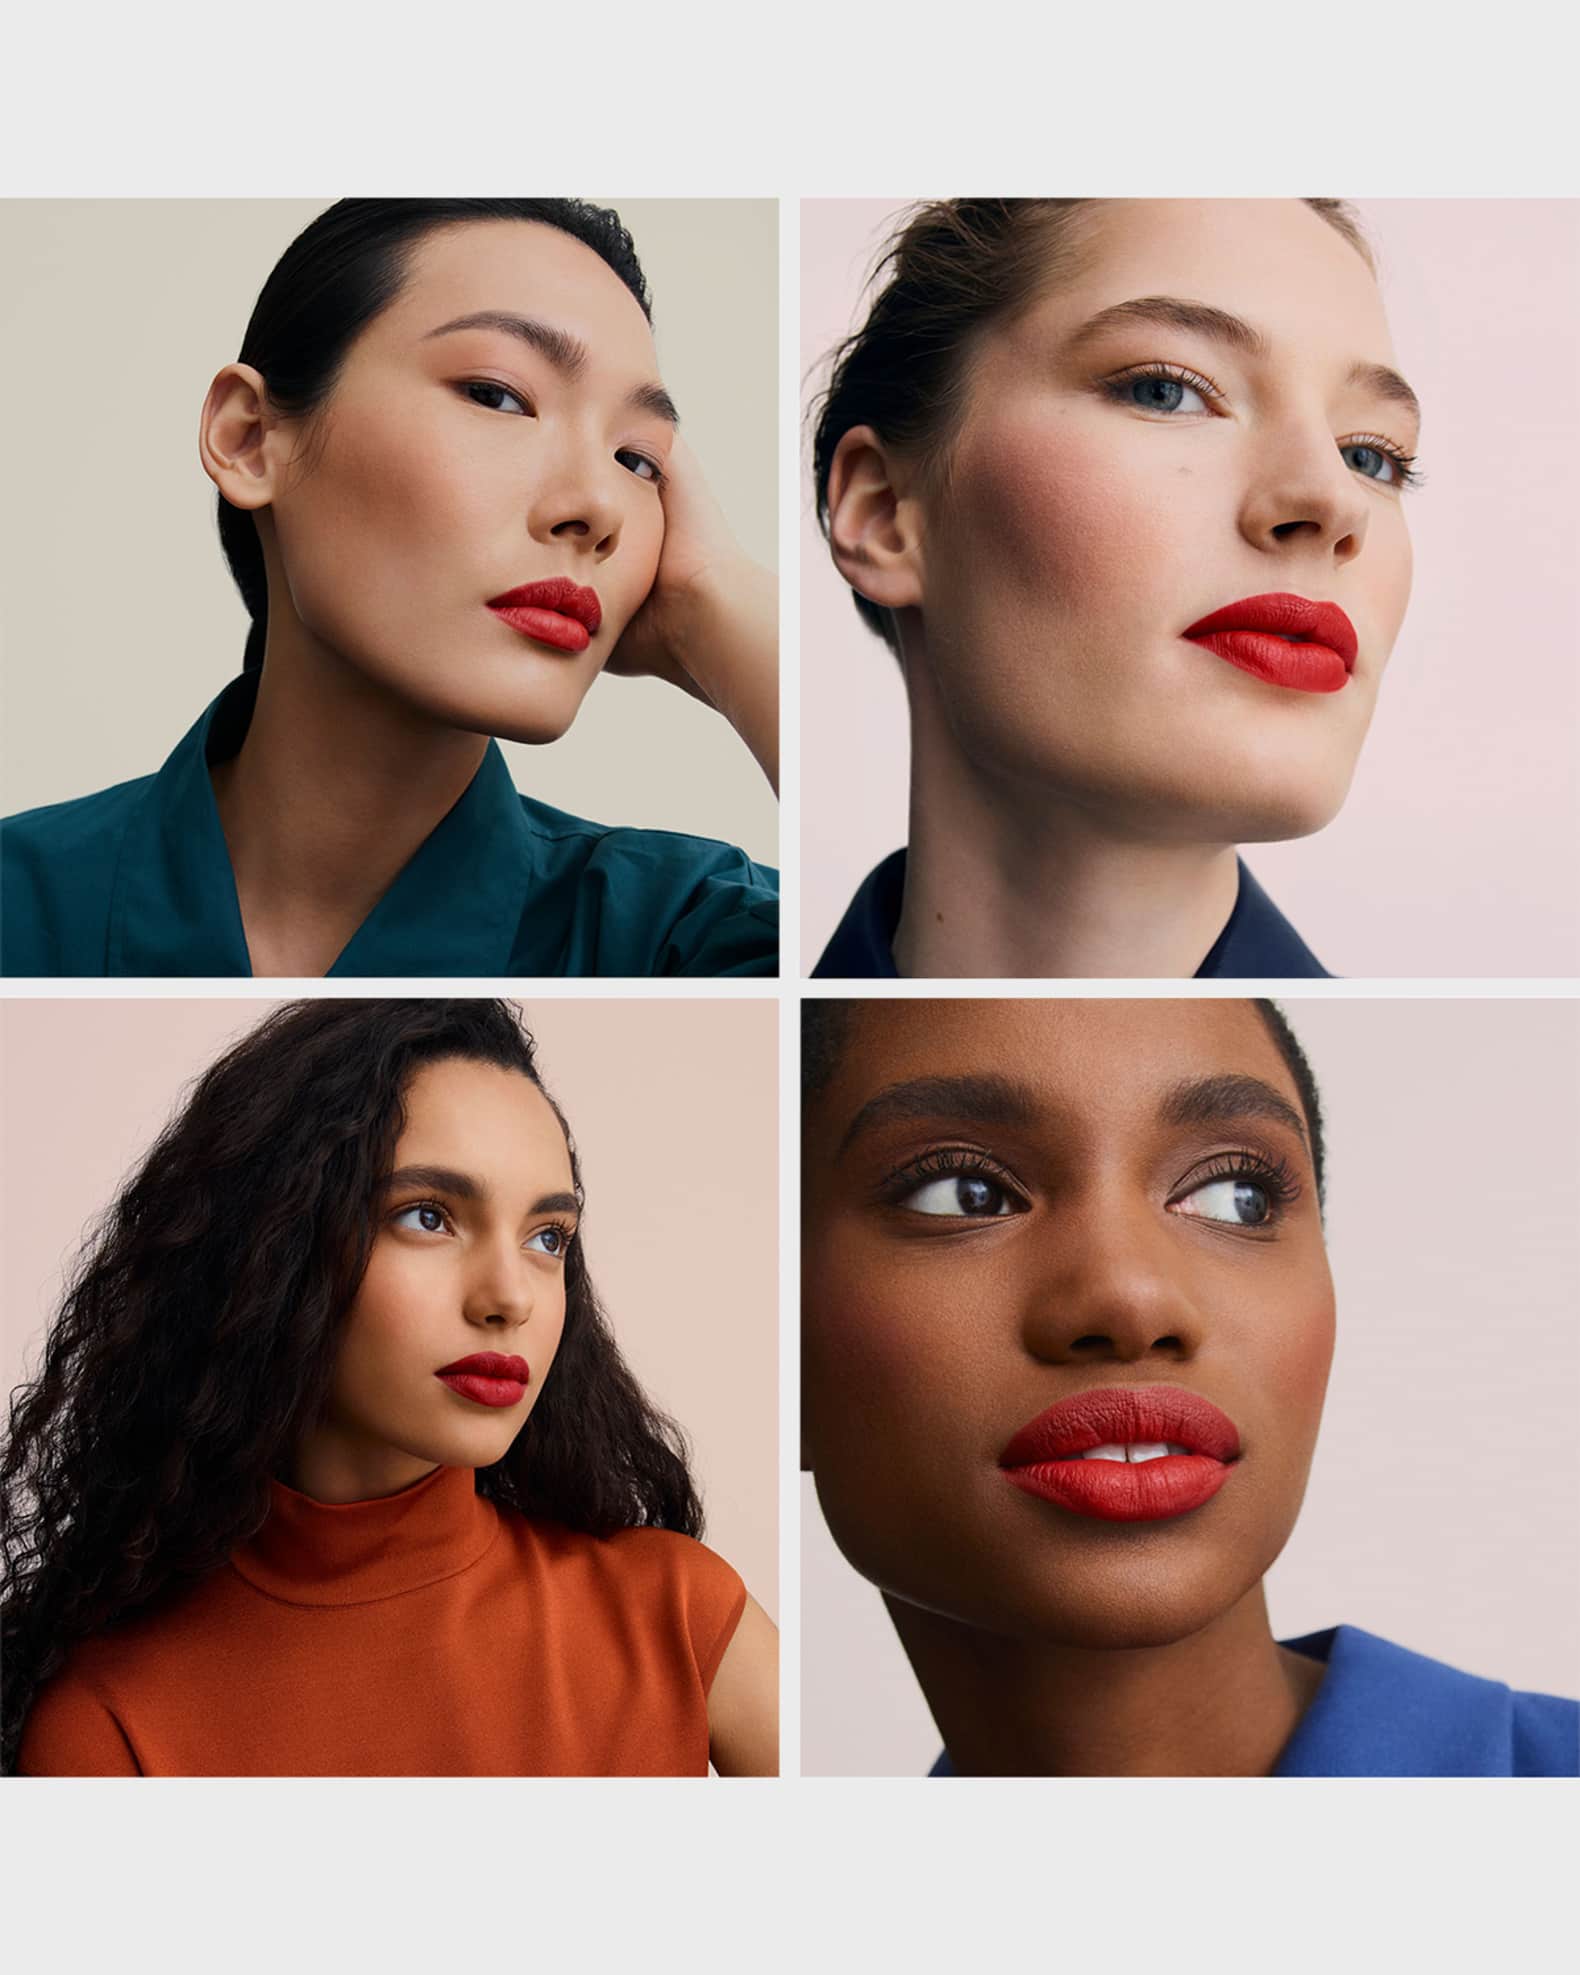 Hermes' New Lipsticks Match The Brand's Iconic Leather Shades